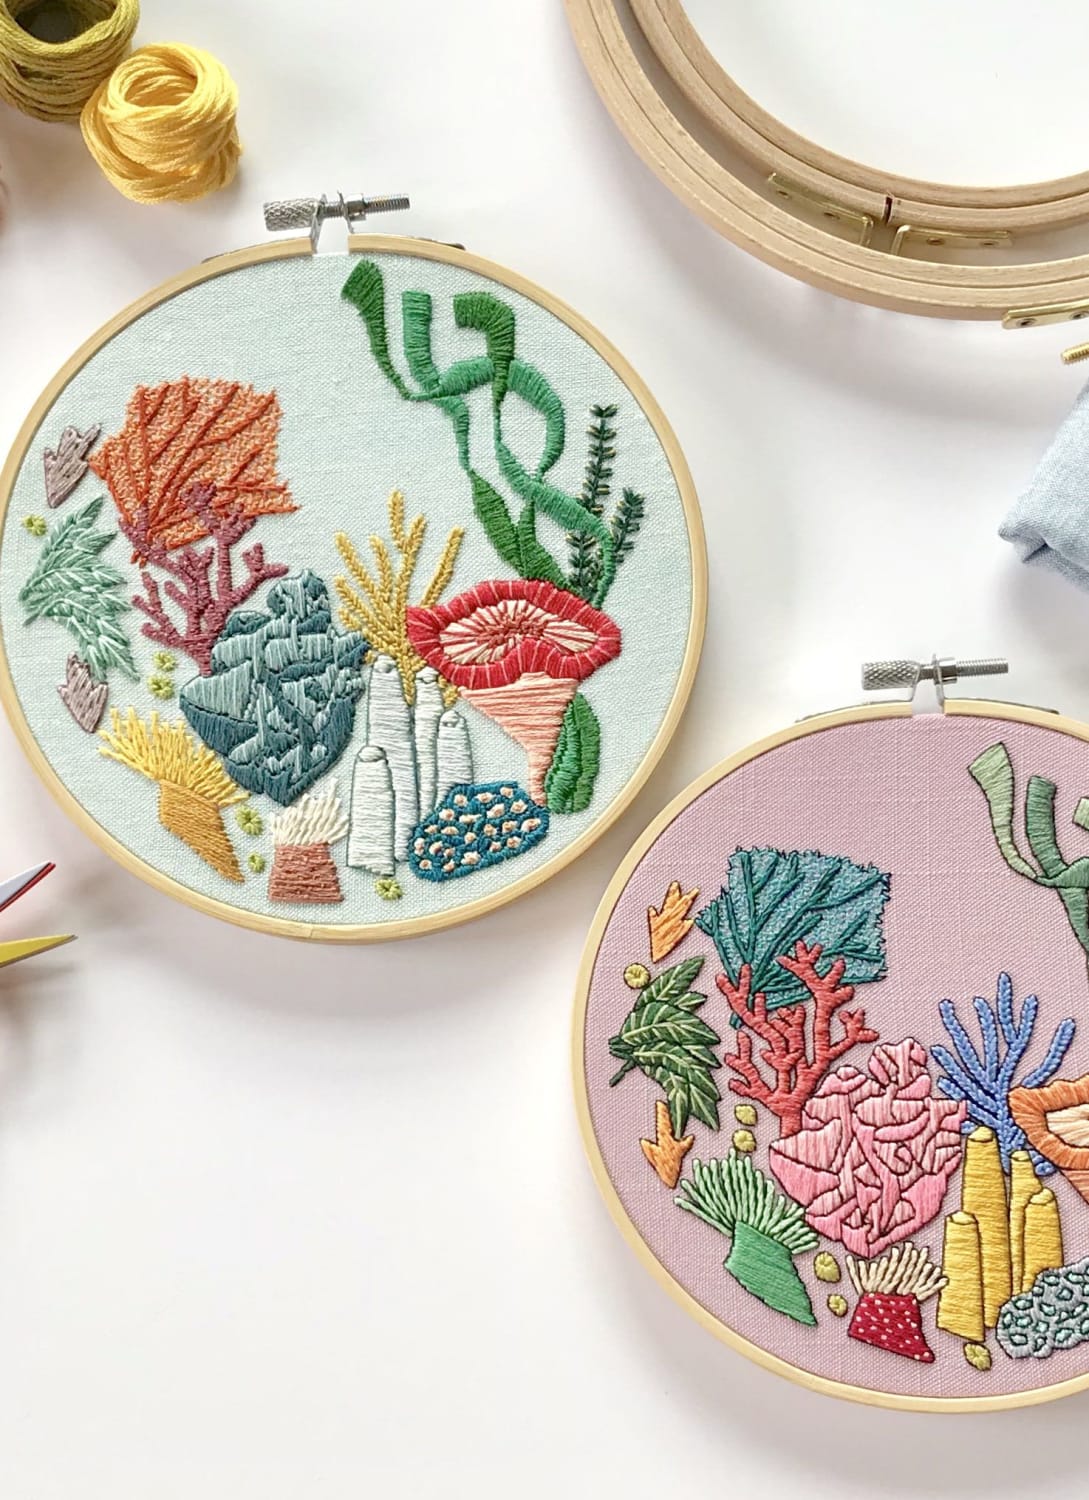 In awe of this under the sea creation. | Hand embroidery stitches, Embroidery patterns, Hand embroidery